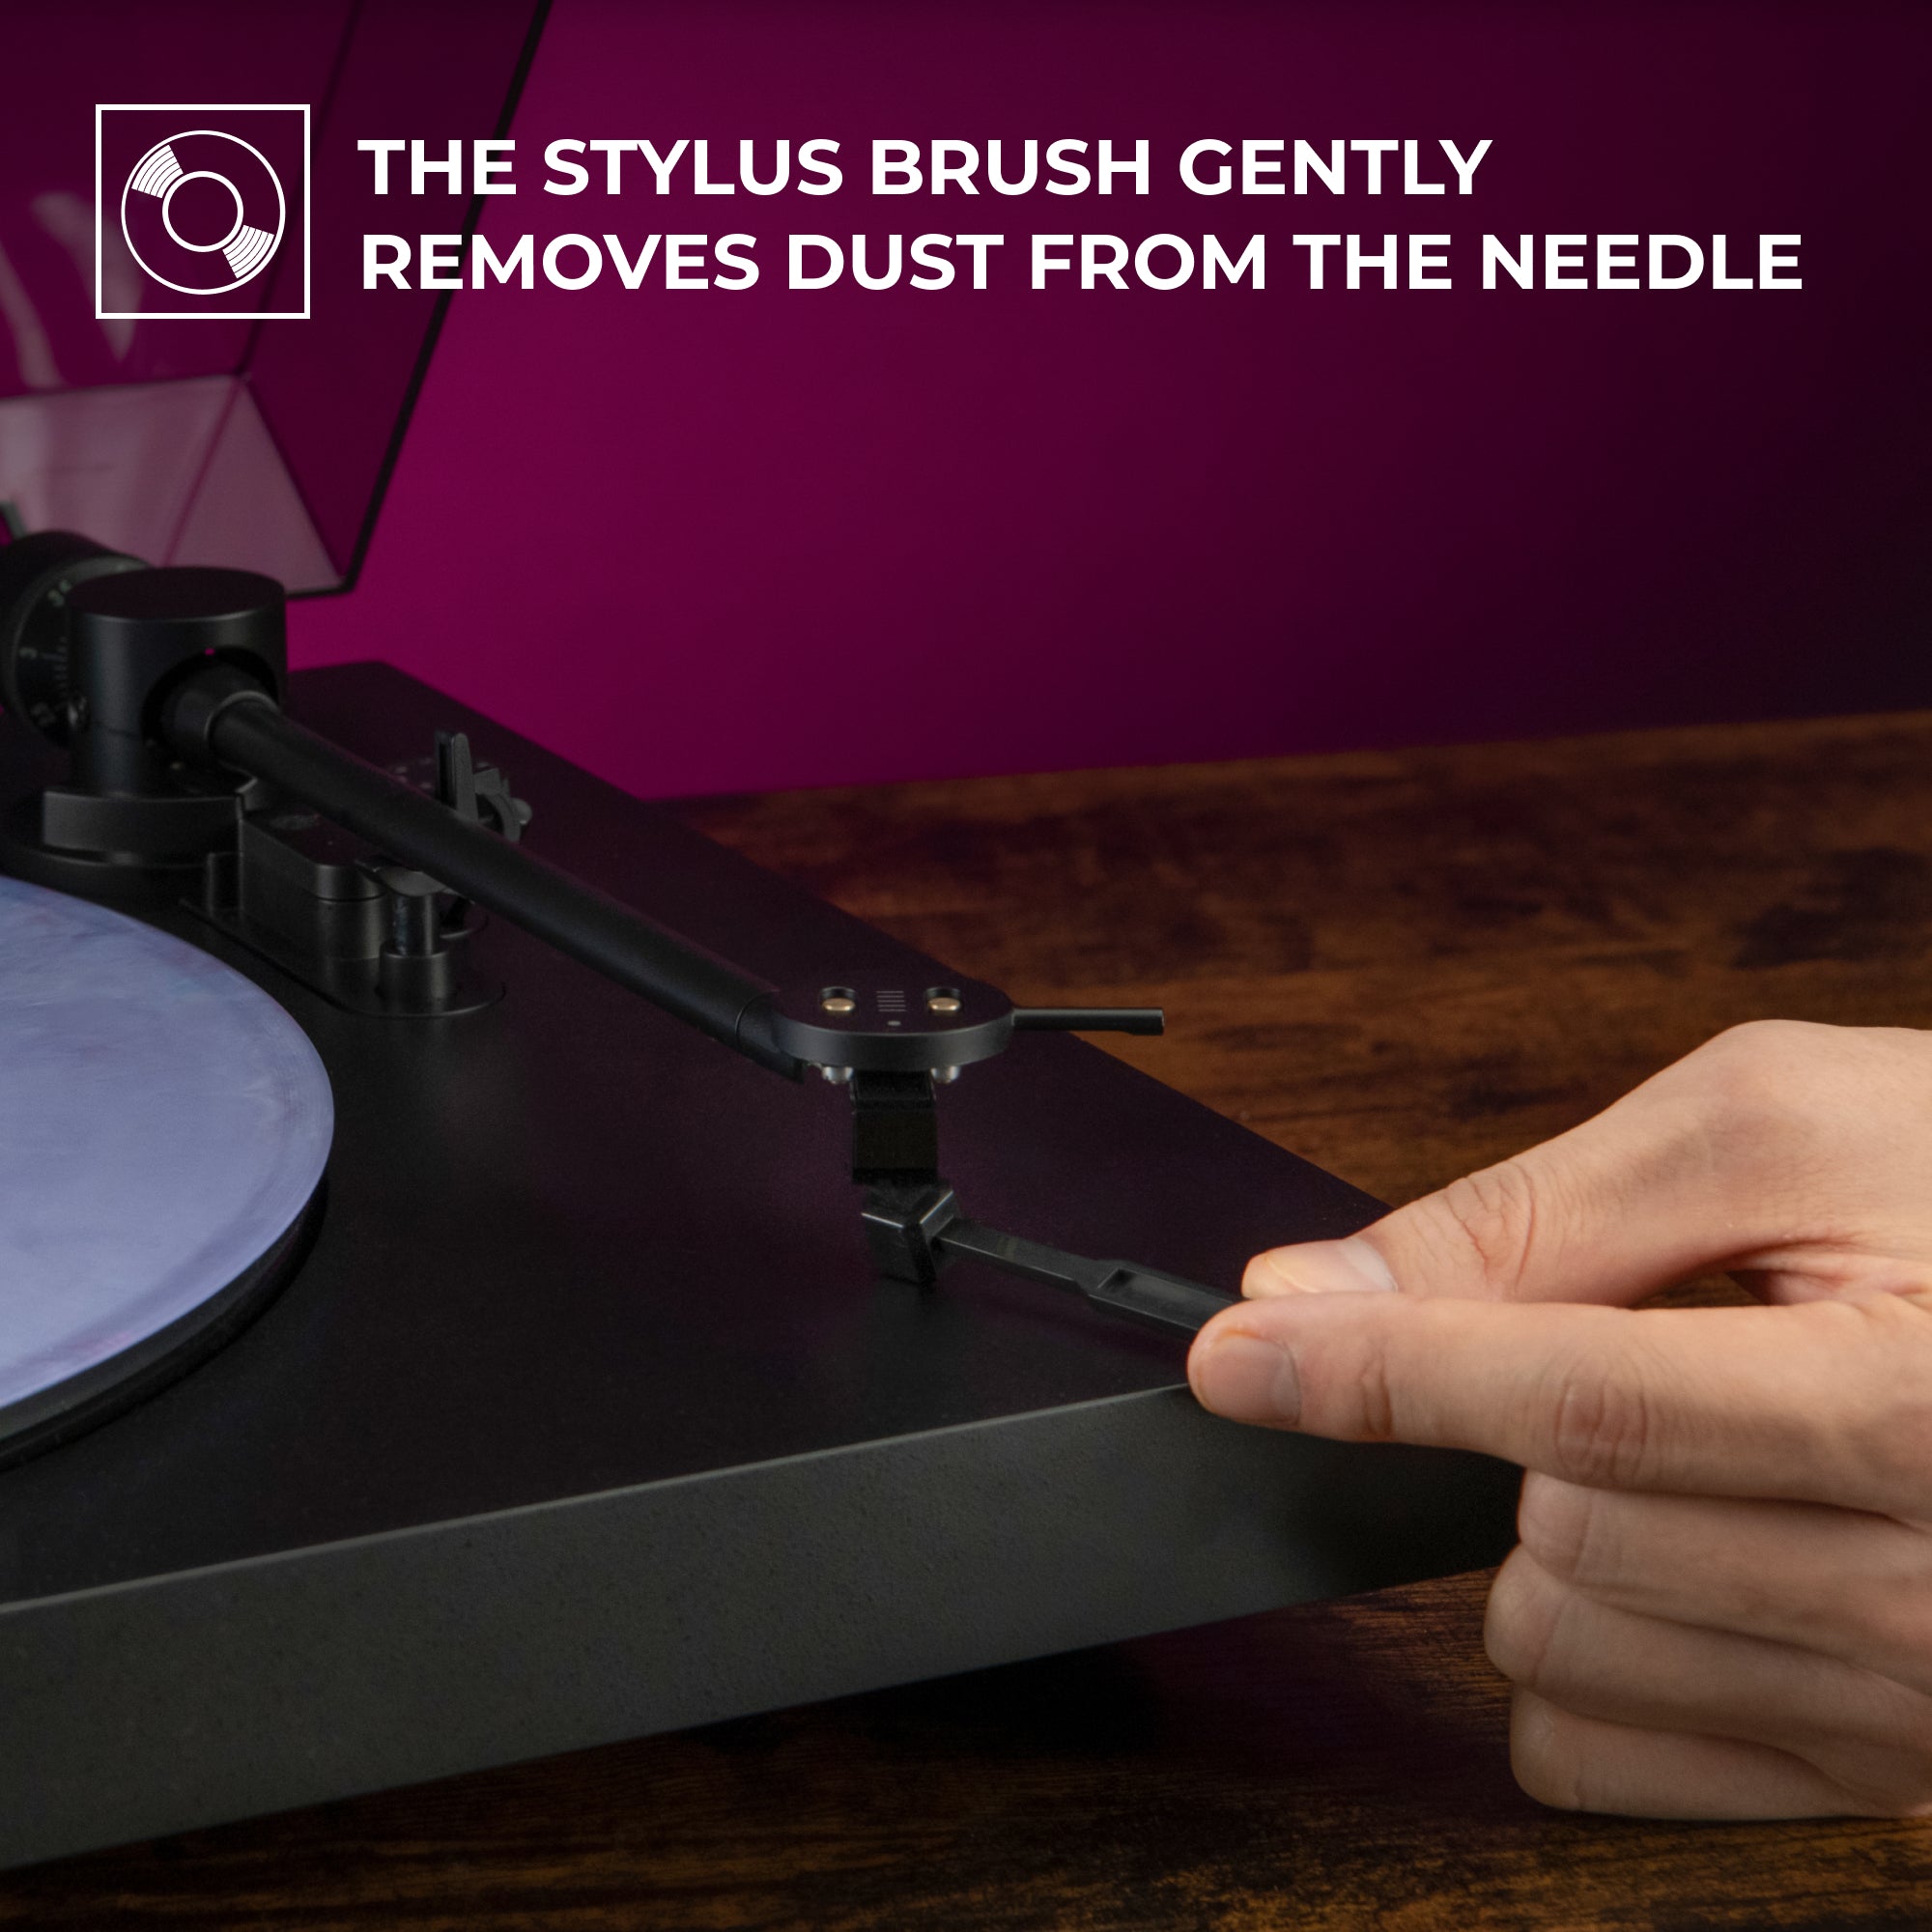 Stylus brush removes dust from needle